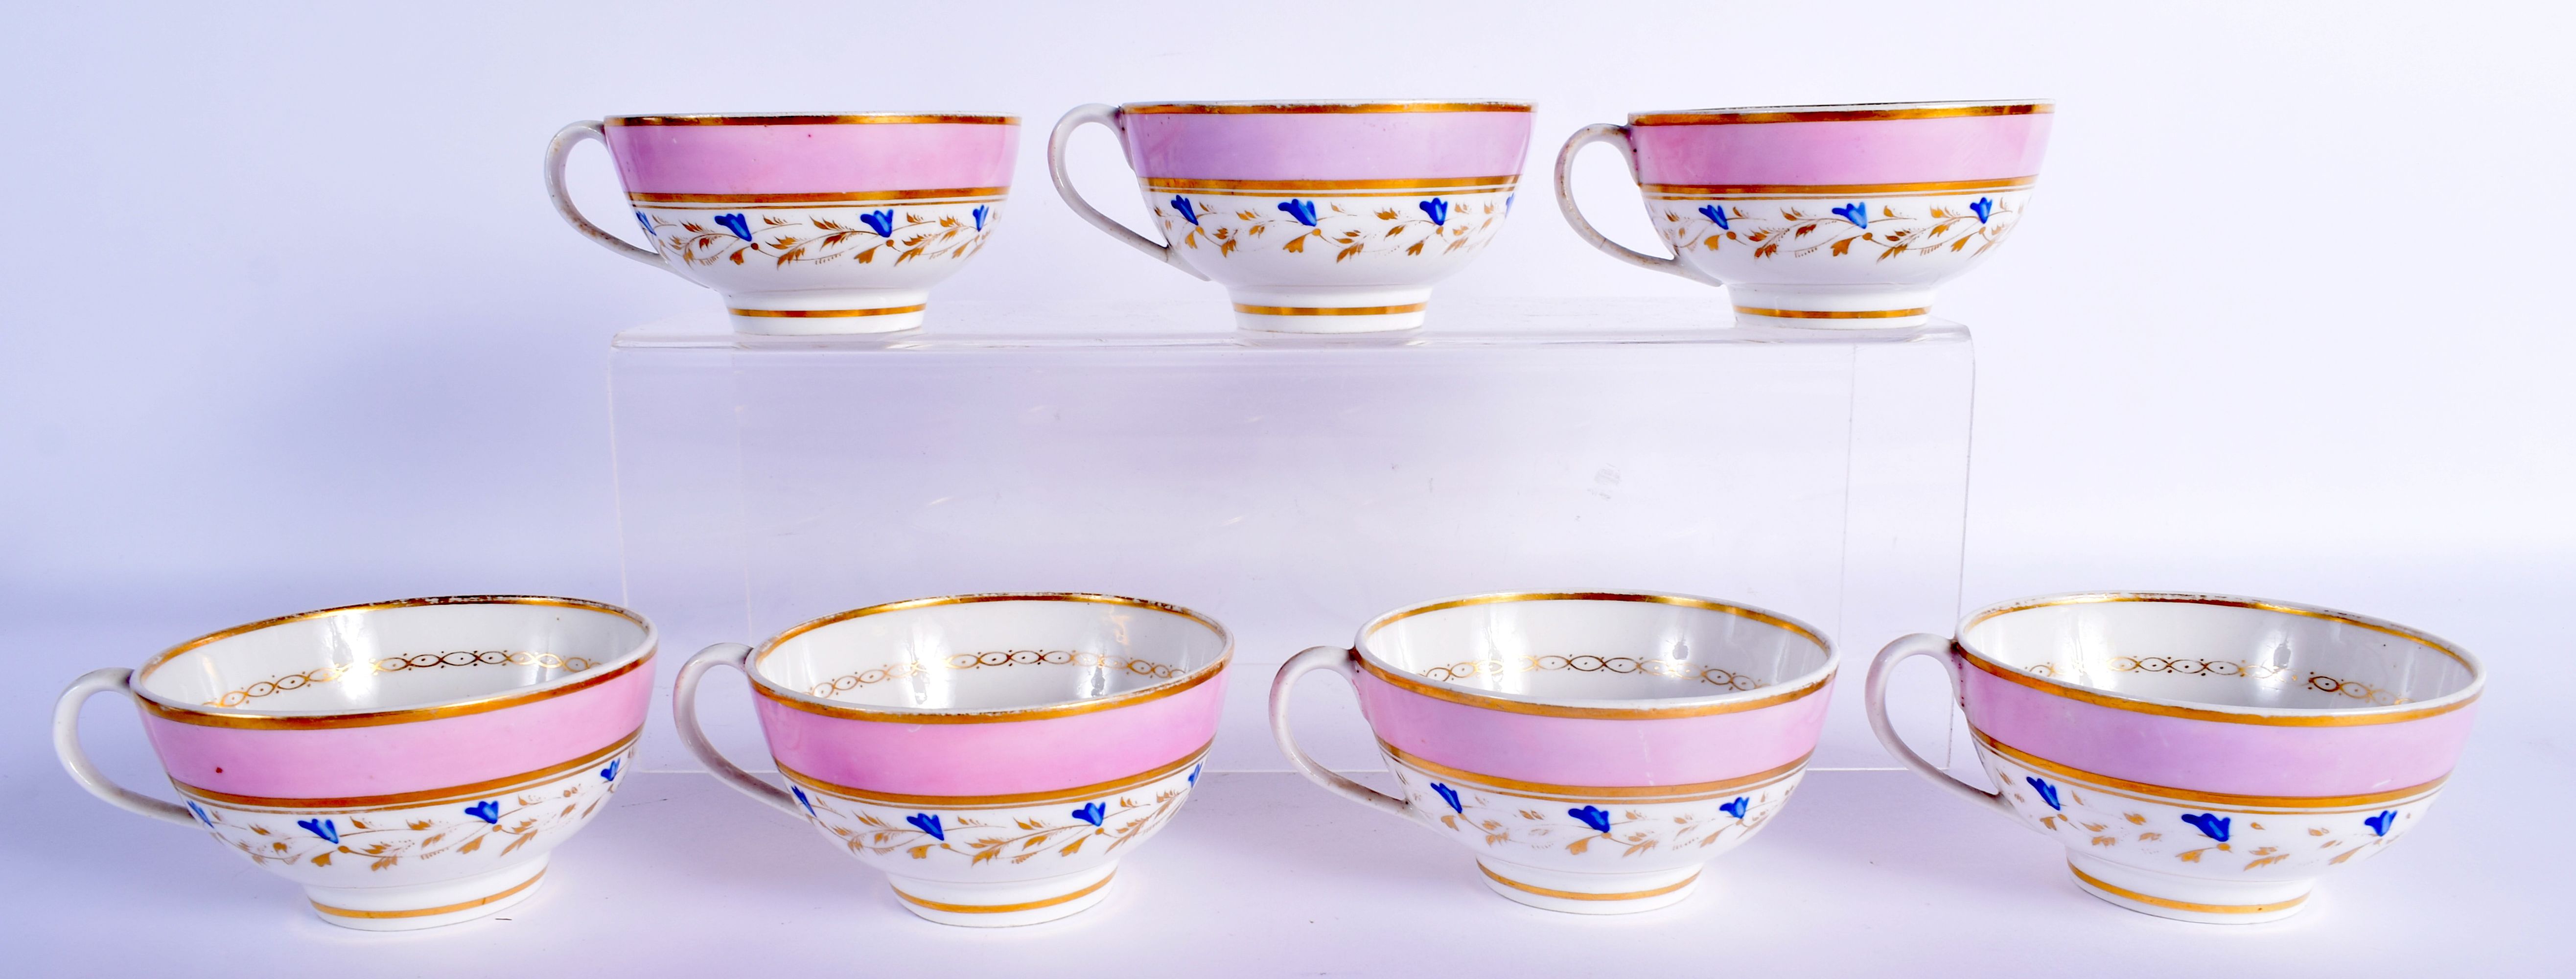 AN EARLY 19TH CENTURY DERBY SALMON GROUND PORCELAIN TEASET painted with blue and gilt scrolls. Large - Image 13 of 15